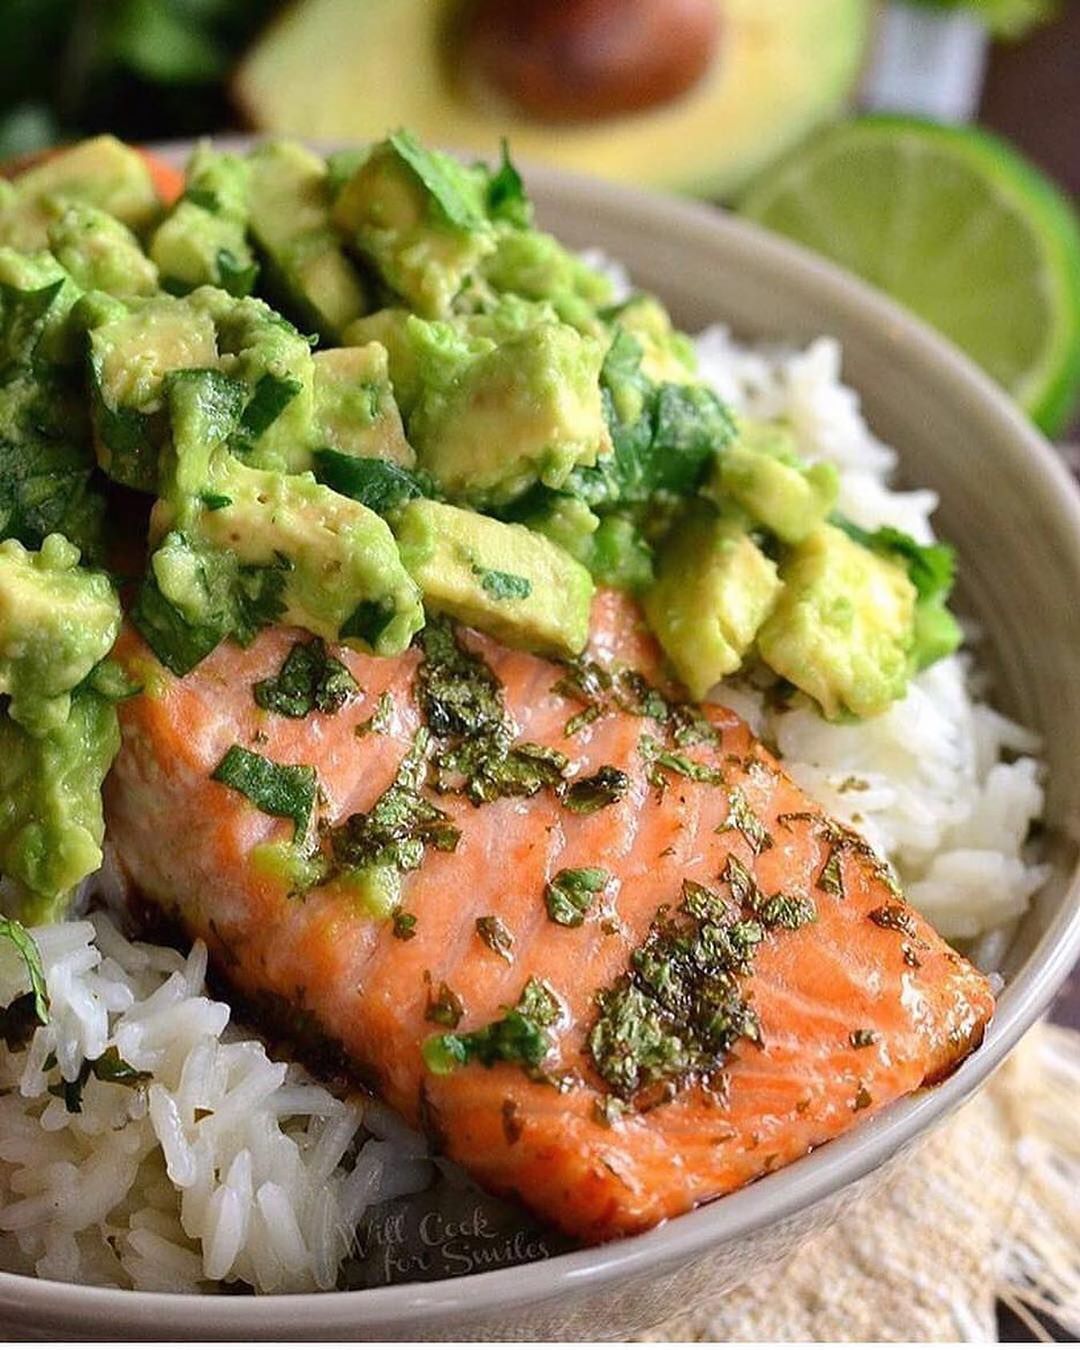 Beautiful honey, lime, and cilantro flavors come together is this tasty salmon r…